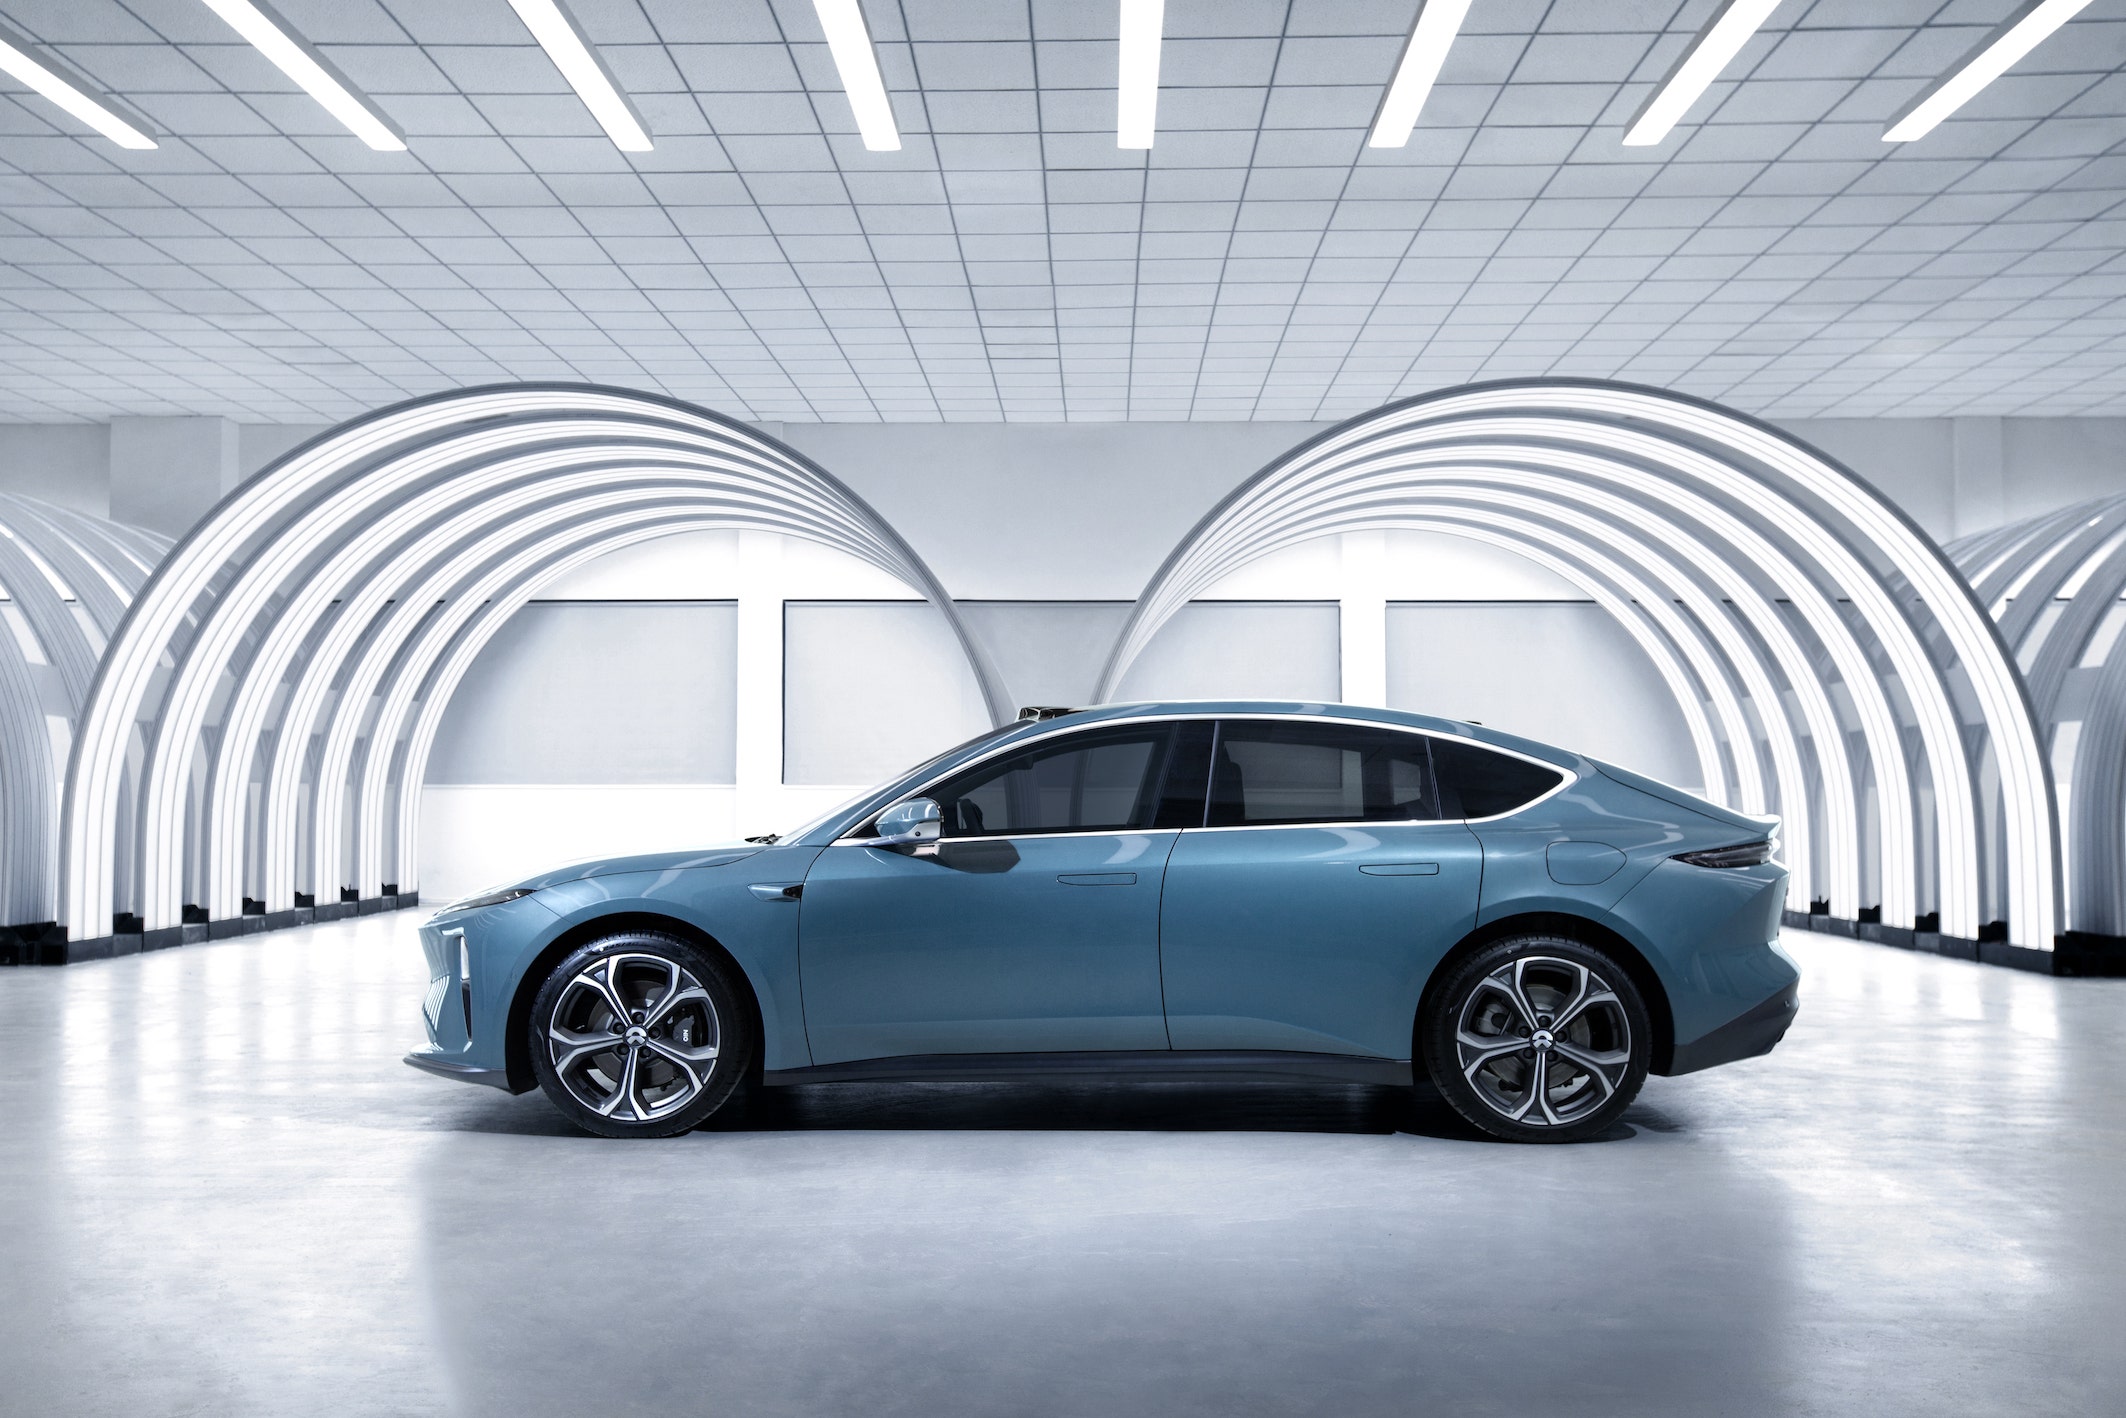 Nio And Tencent Collaborate For Self-Driving Project